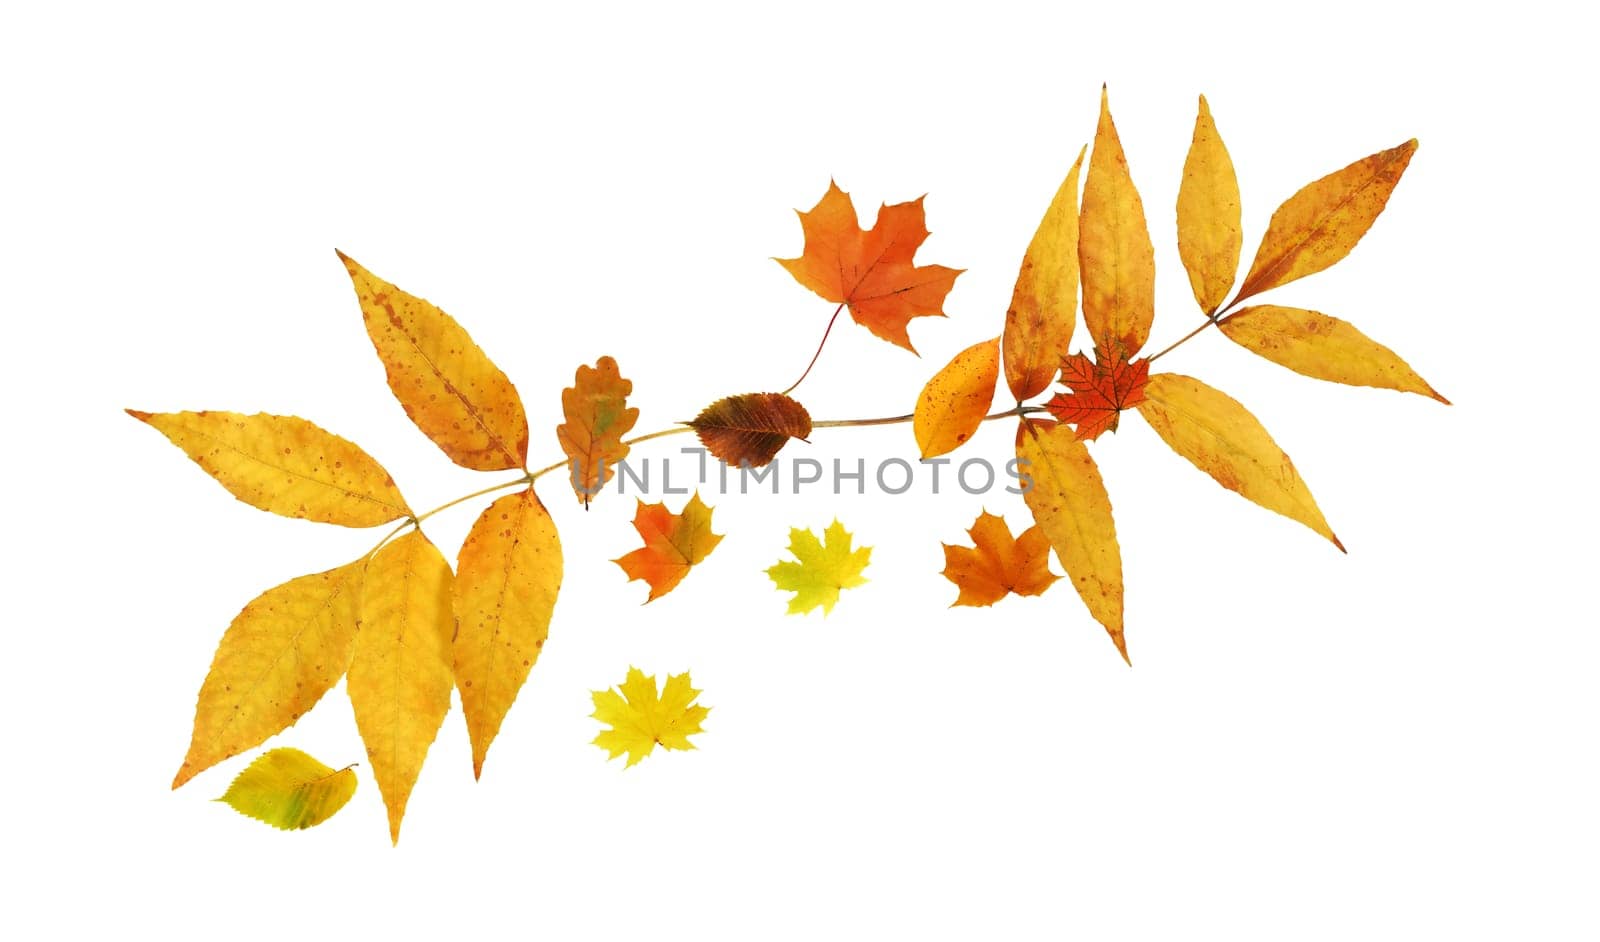 Autumn concept. Set of nice various autumn leaves on white background